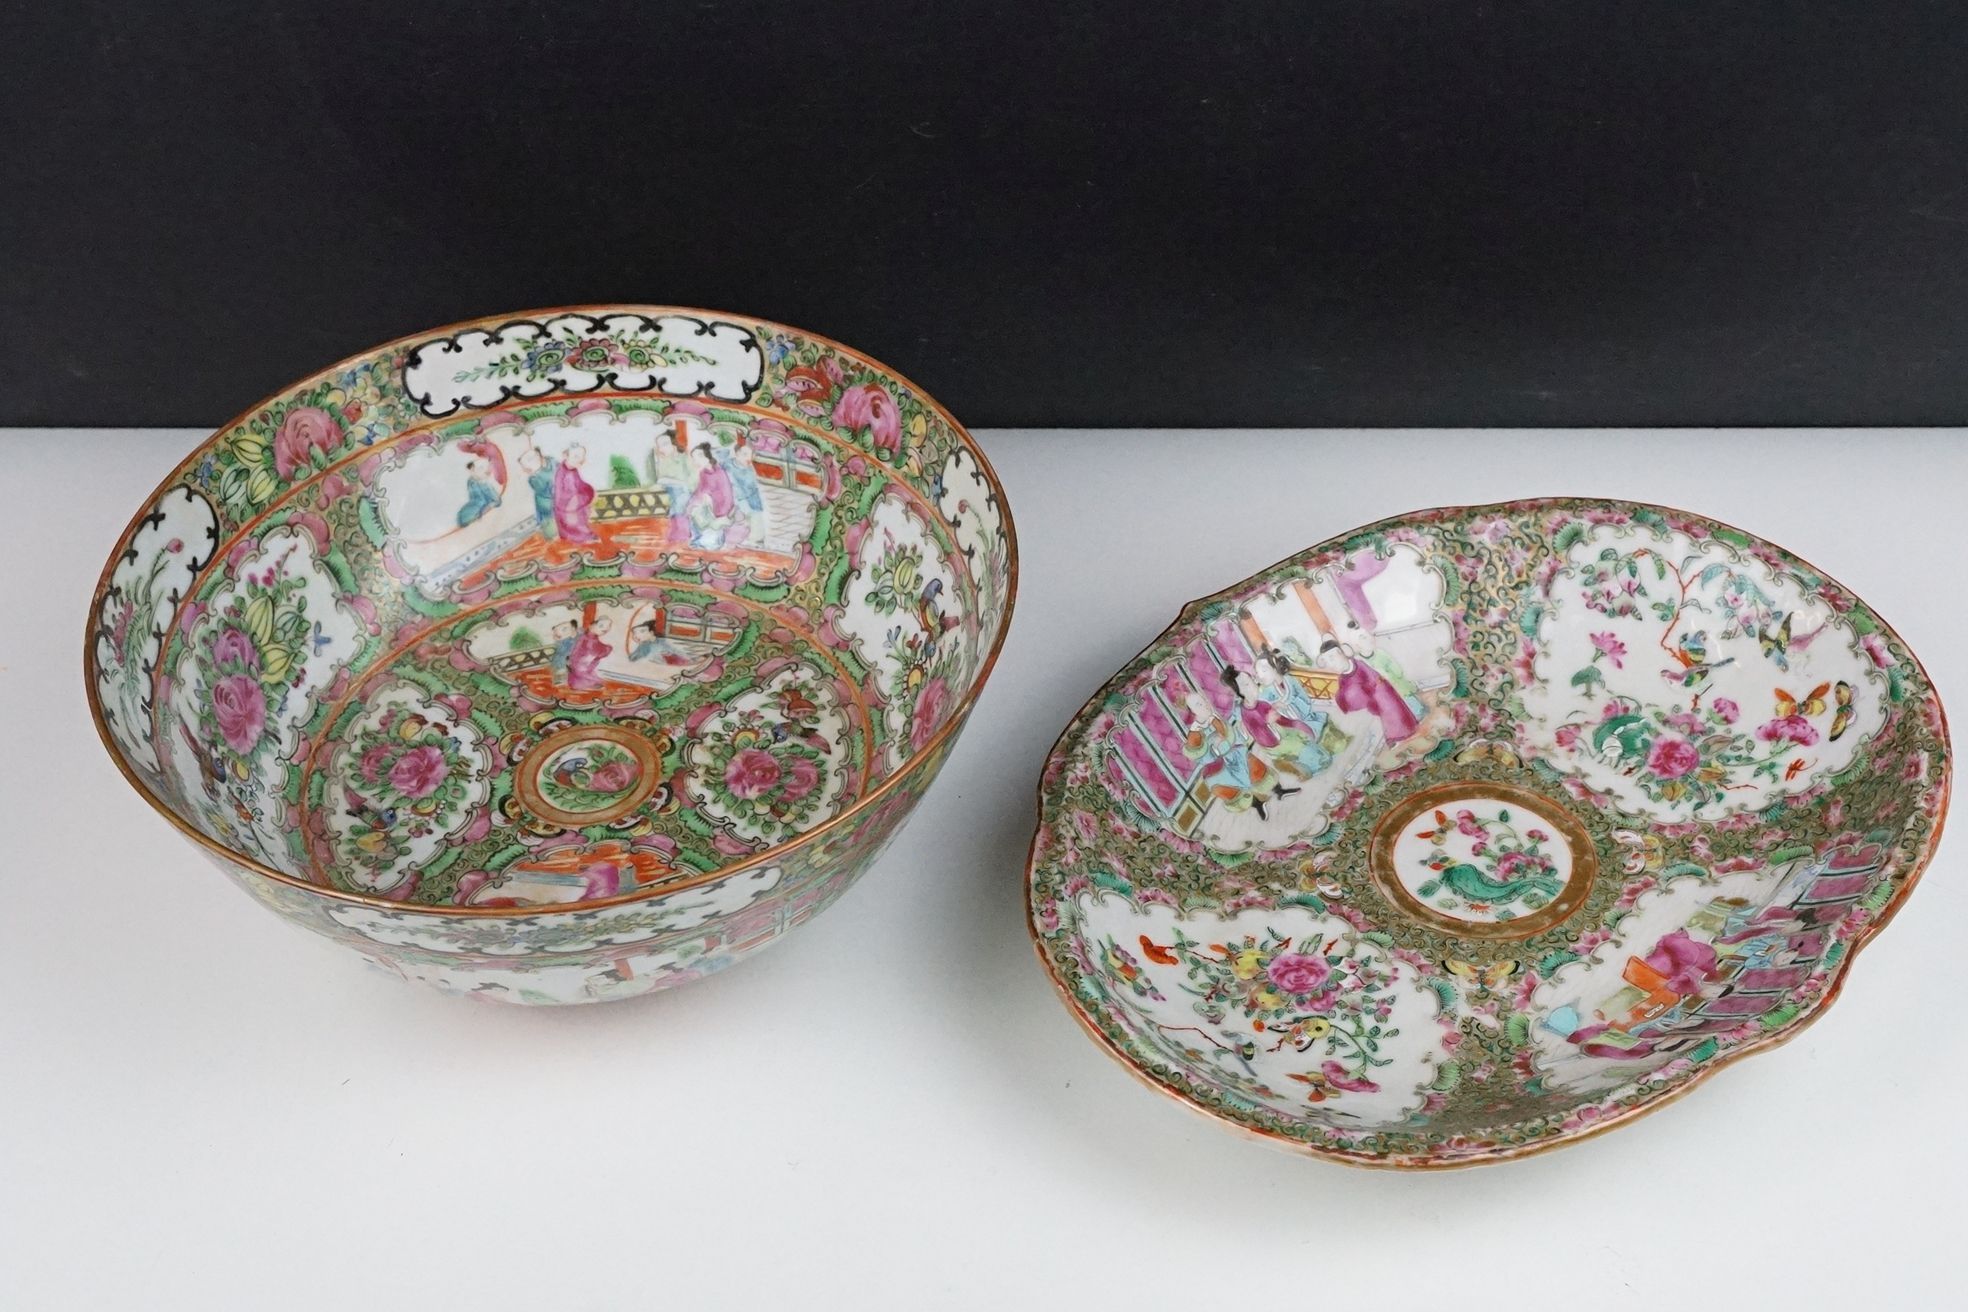 Chinese Cantonese Famille Rose Porcelain Bowl decorated with panels of figures and panels of exotic